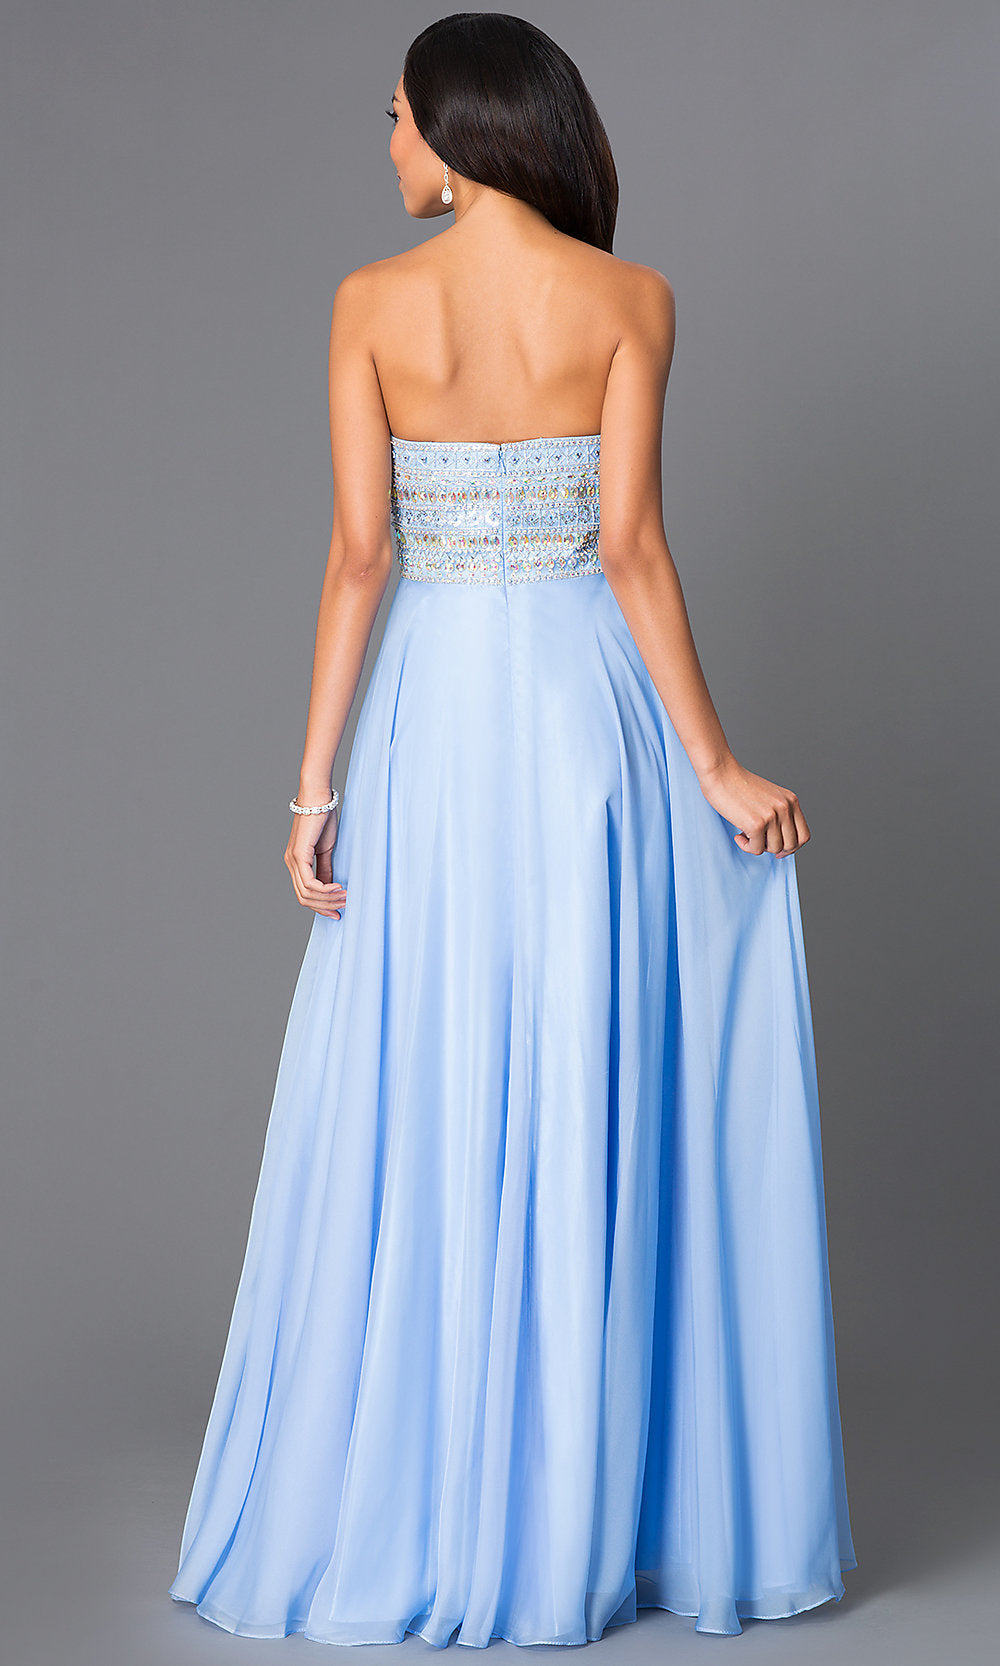  Beaded Strapless Bodice Long A-Line Prom Gown